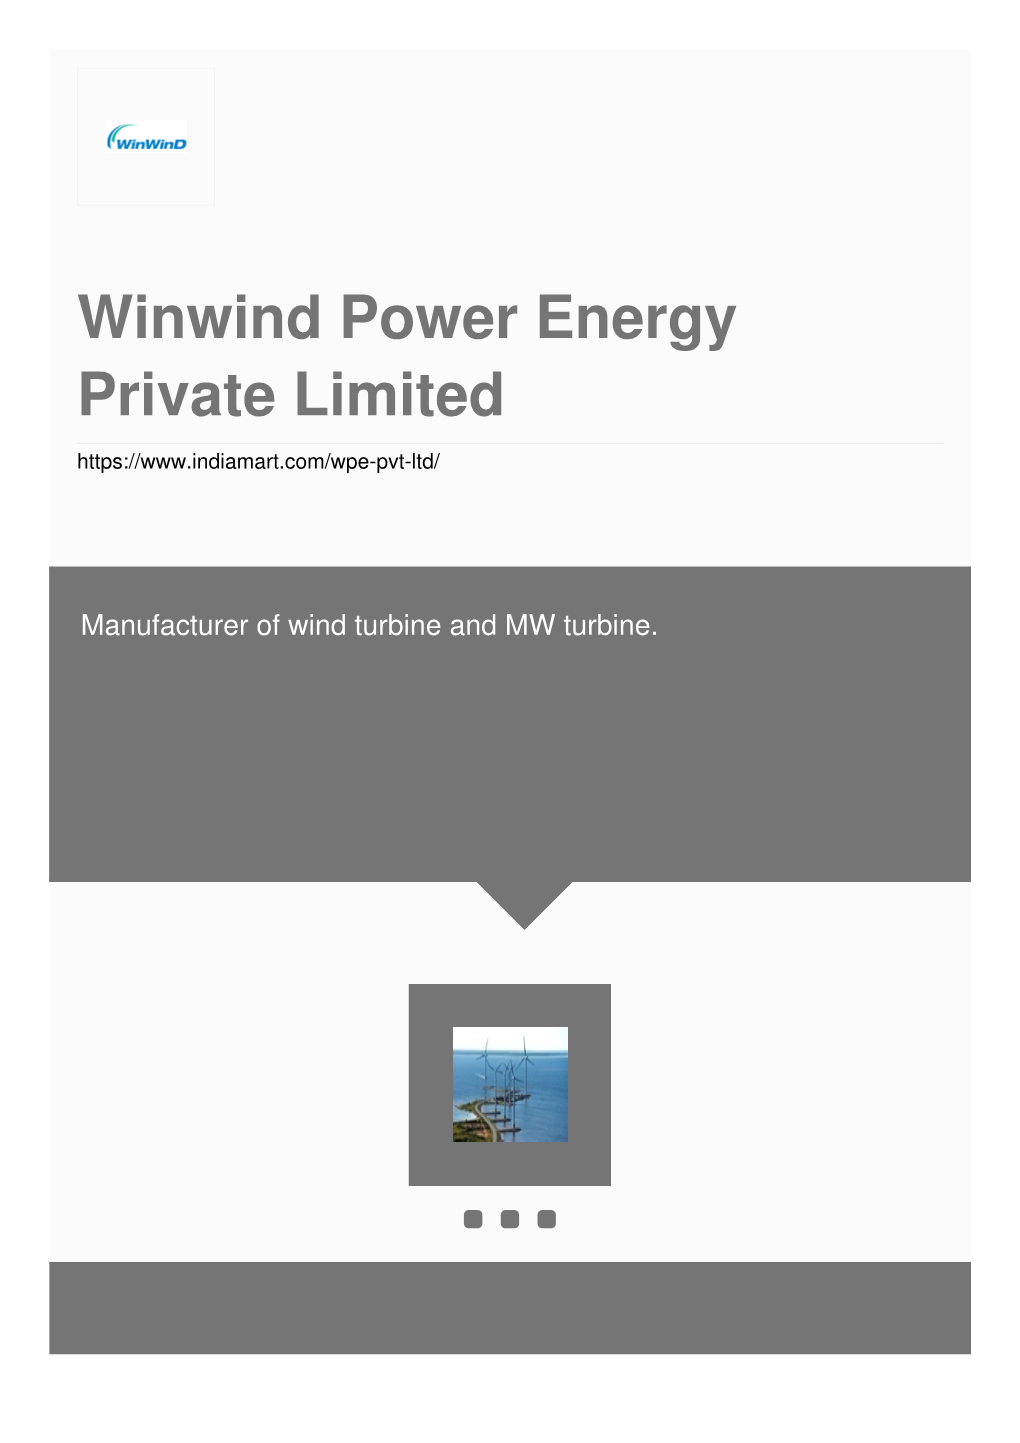 Winwind Power Energy Private Limited